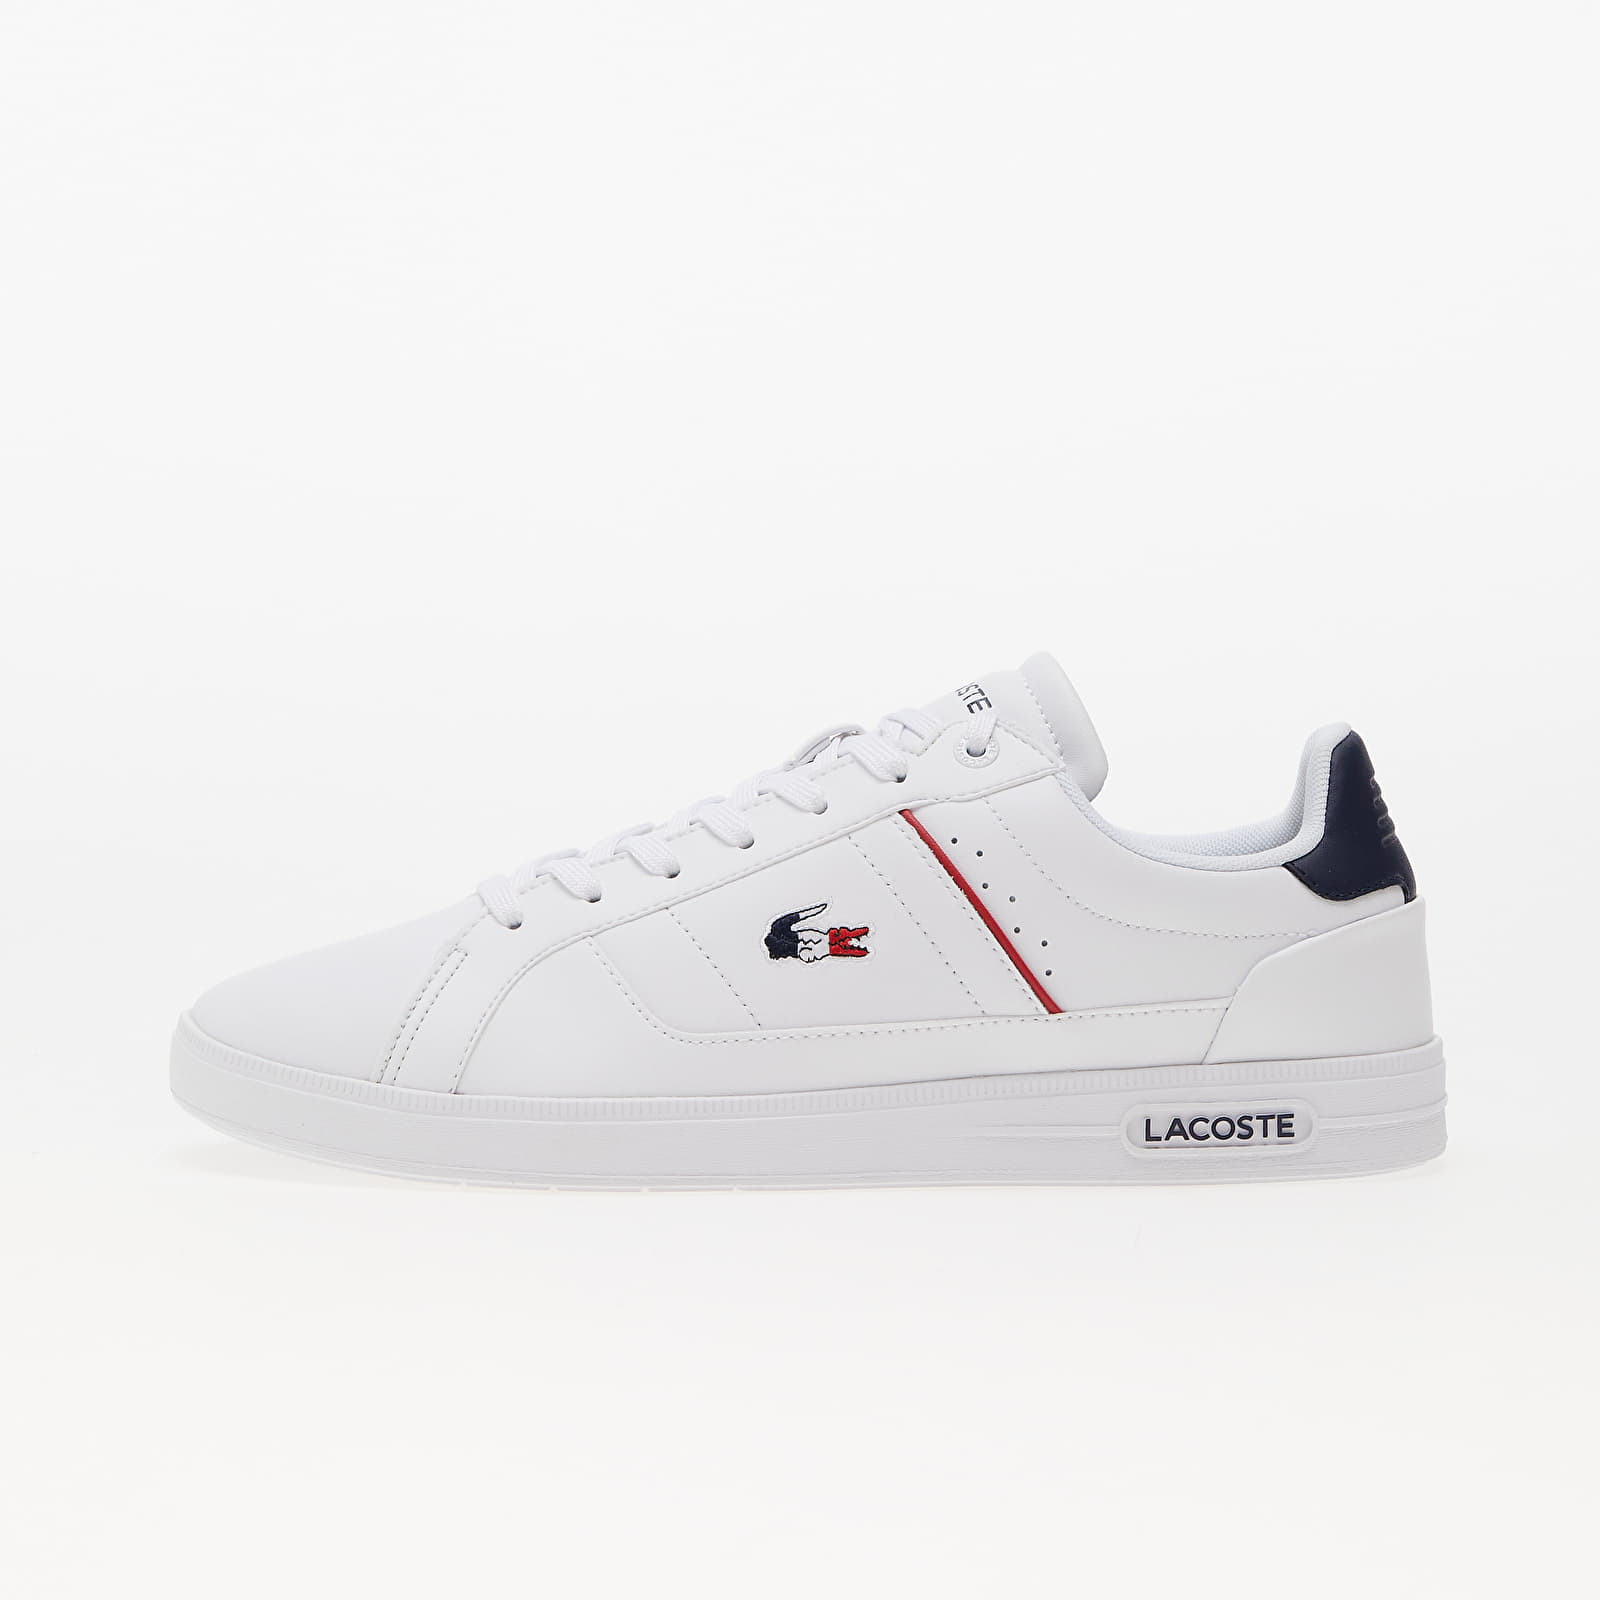 Chaussures et baskets homme LACOSTE Europa Pro White/ Navy/ RE